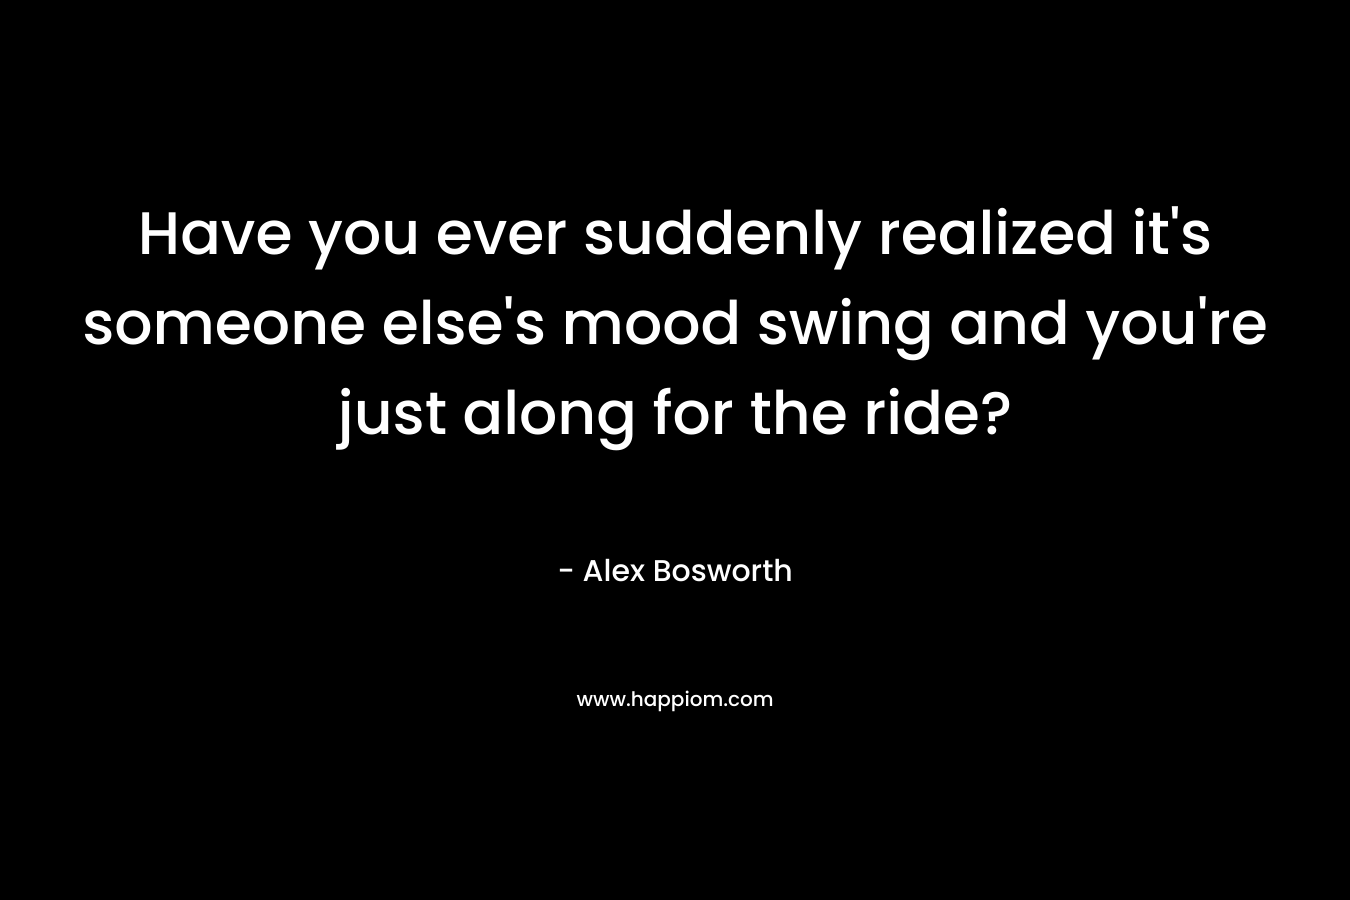 Have you ever suddenly realized it's someone else's mood swing and you're just along for the ride?